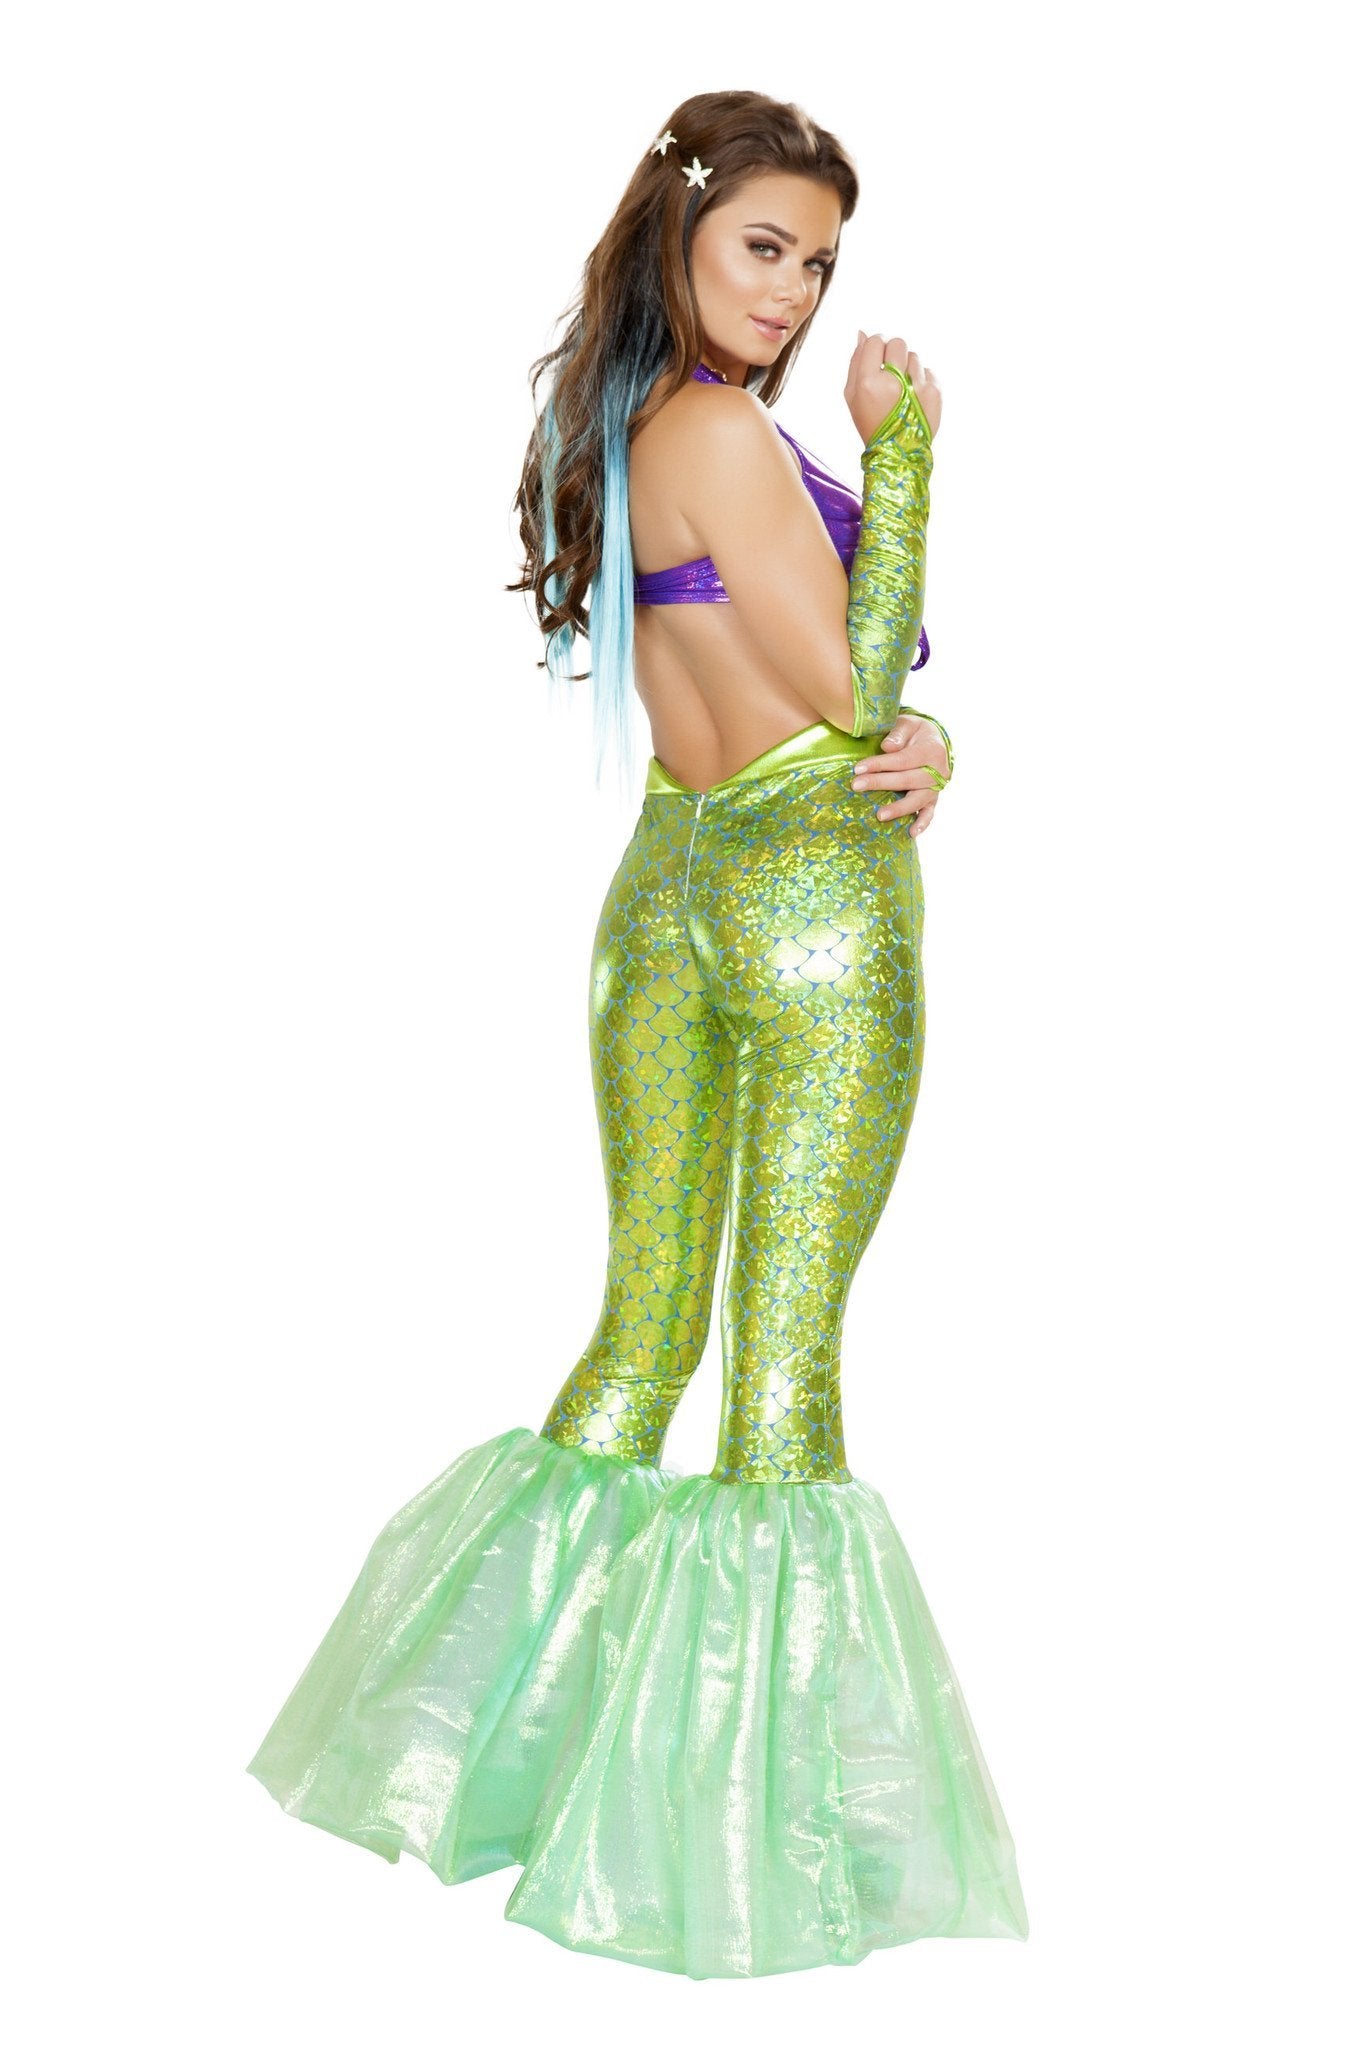 Buy 2pc Poseidon’s Daughter Mermaid Costume from RomaRetailShop for 58.99 with Same Day Shipping Designed by Roma Costume 4656-AS-S